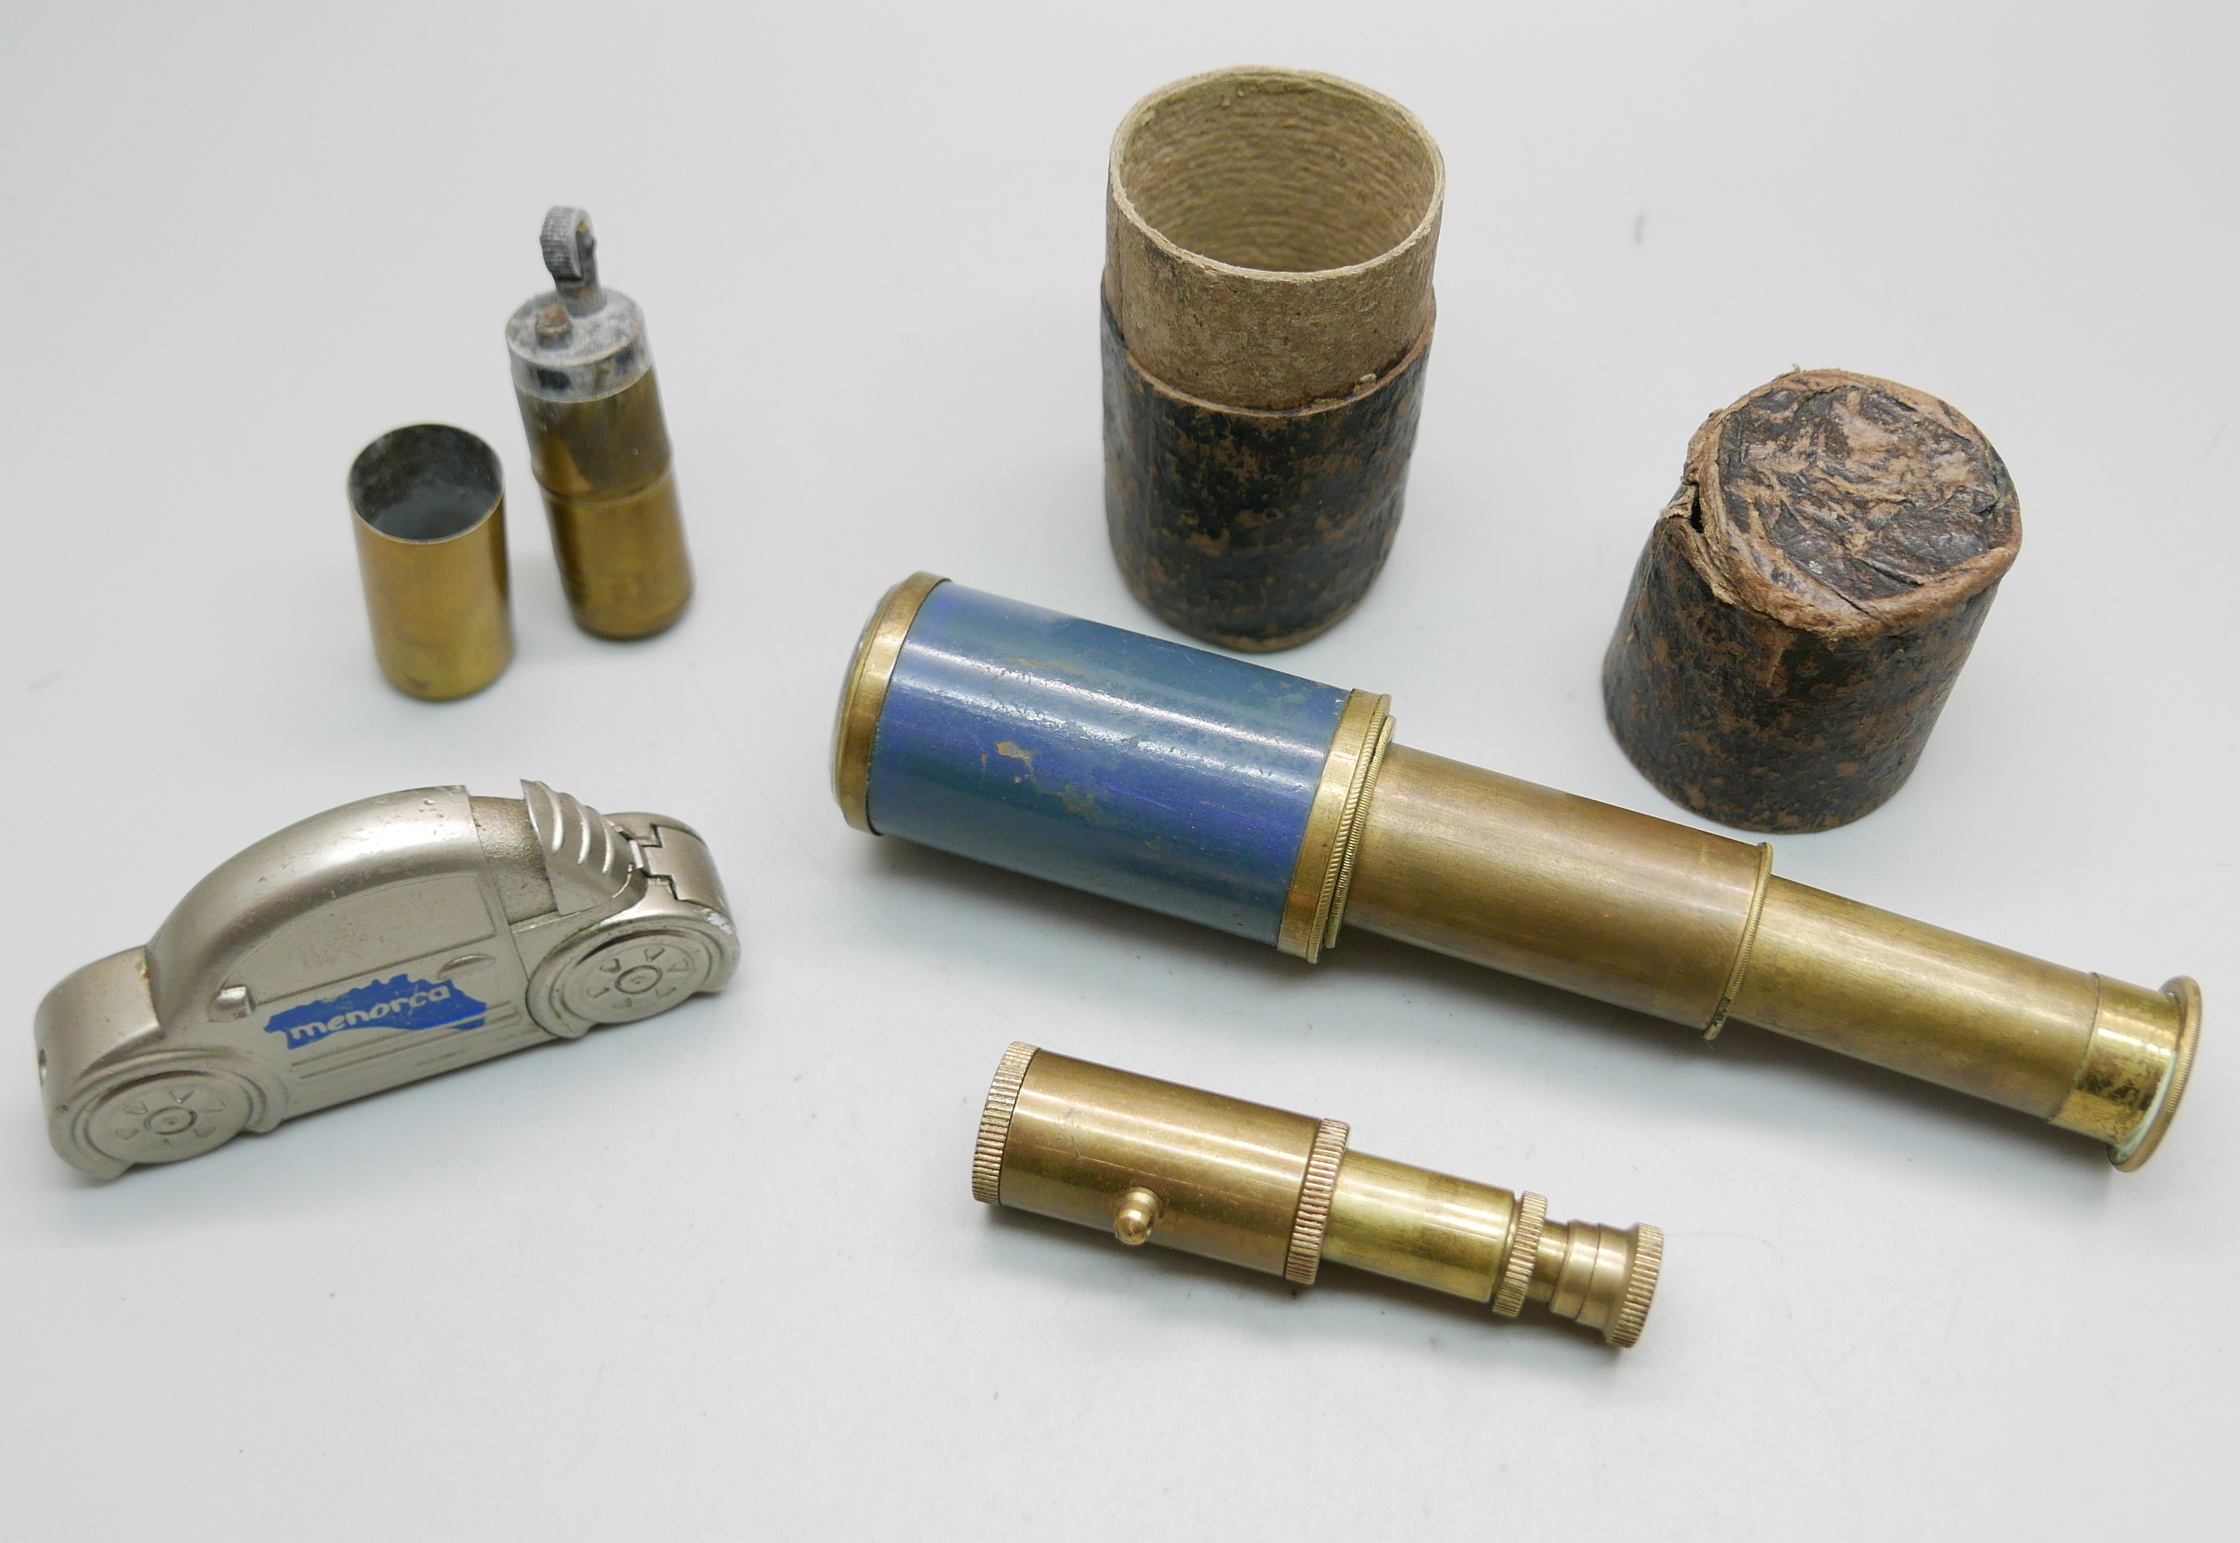 A brass trench art type lighter, a pocket telescope, with case, and one other small telescope and